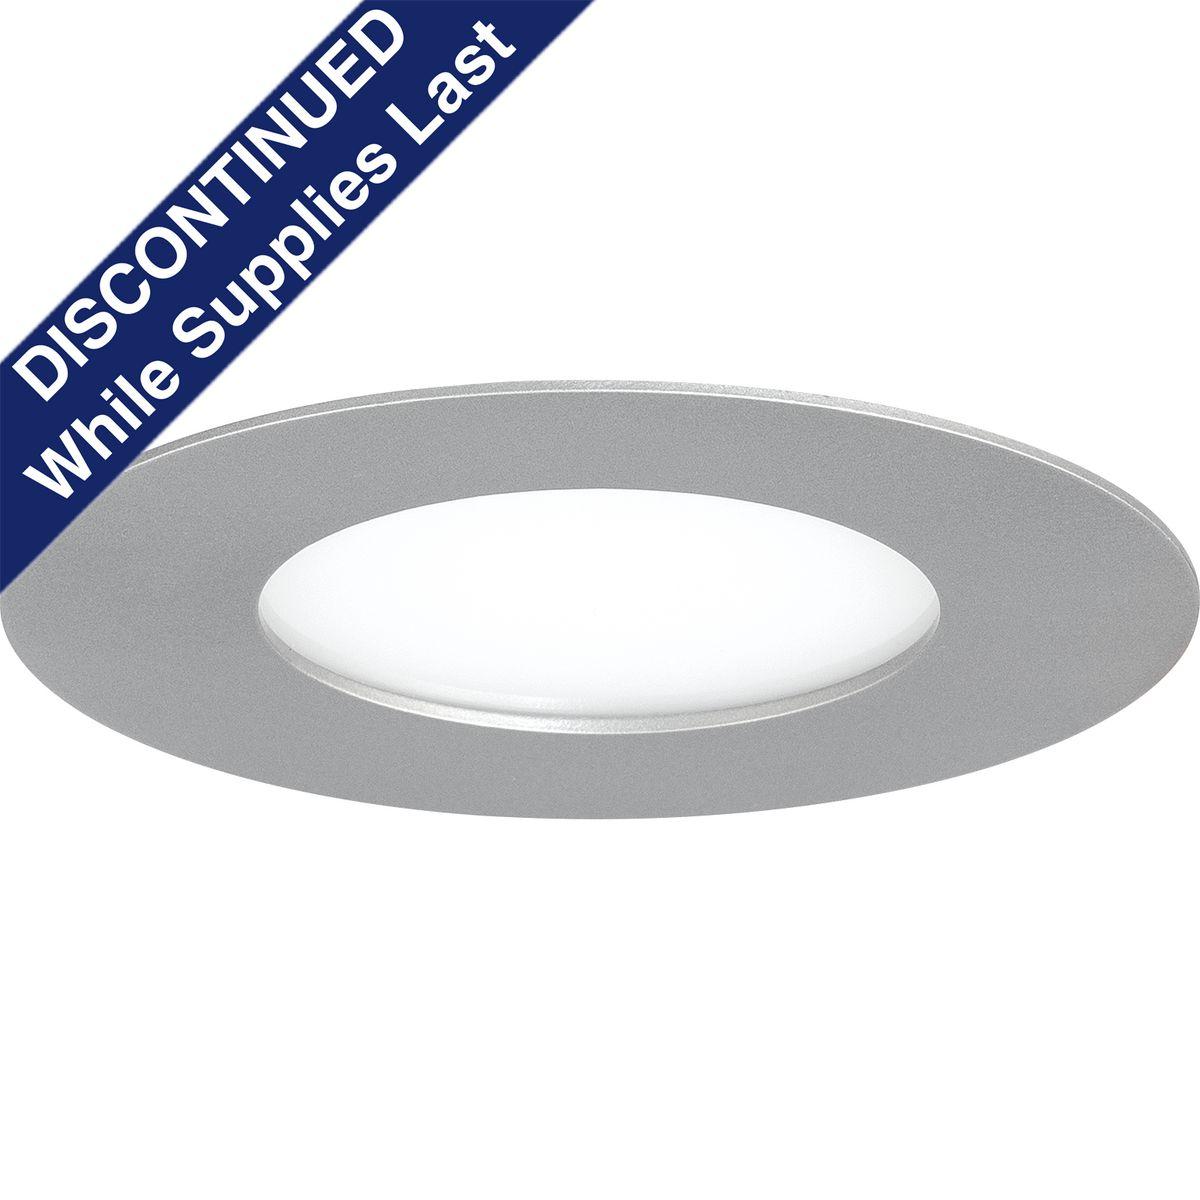 Hubbell P800004-009-30 5" Slim, low profile recessed downlight combines innovative technology, aesthetics, functionality and affordability. No housing or J-Box required for installation and wet location listed provides the ultimate flexibility. The low profile downlight is idea